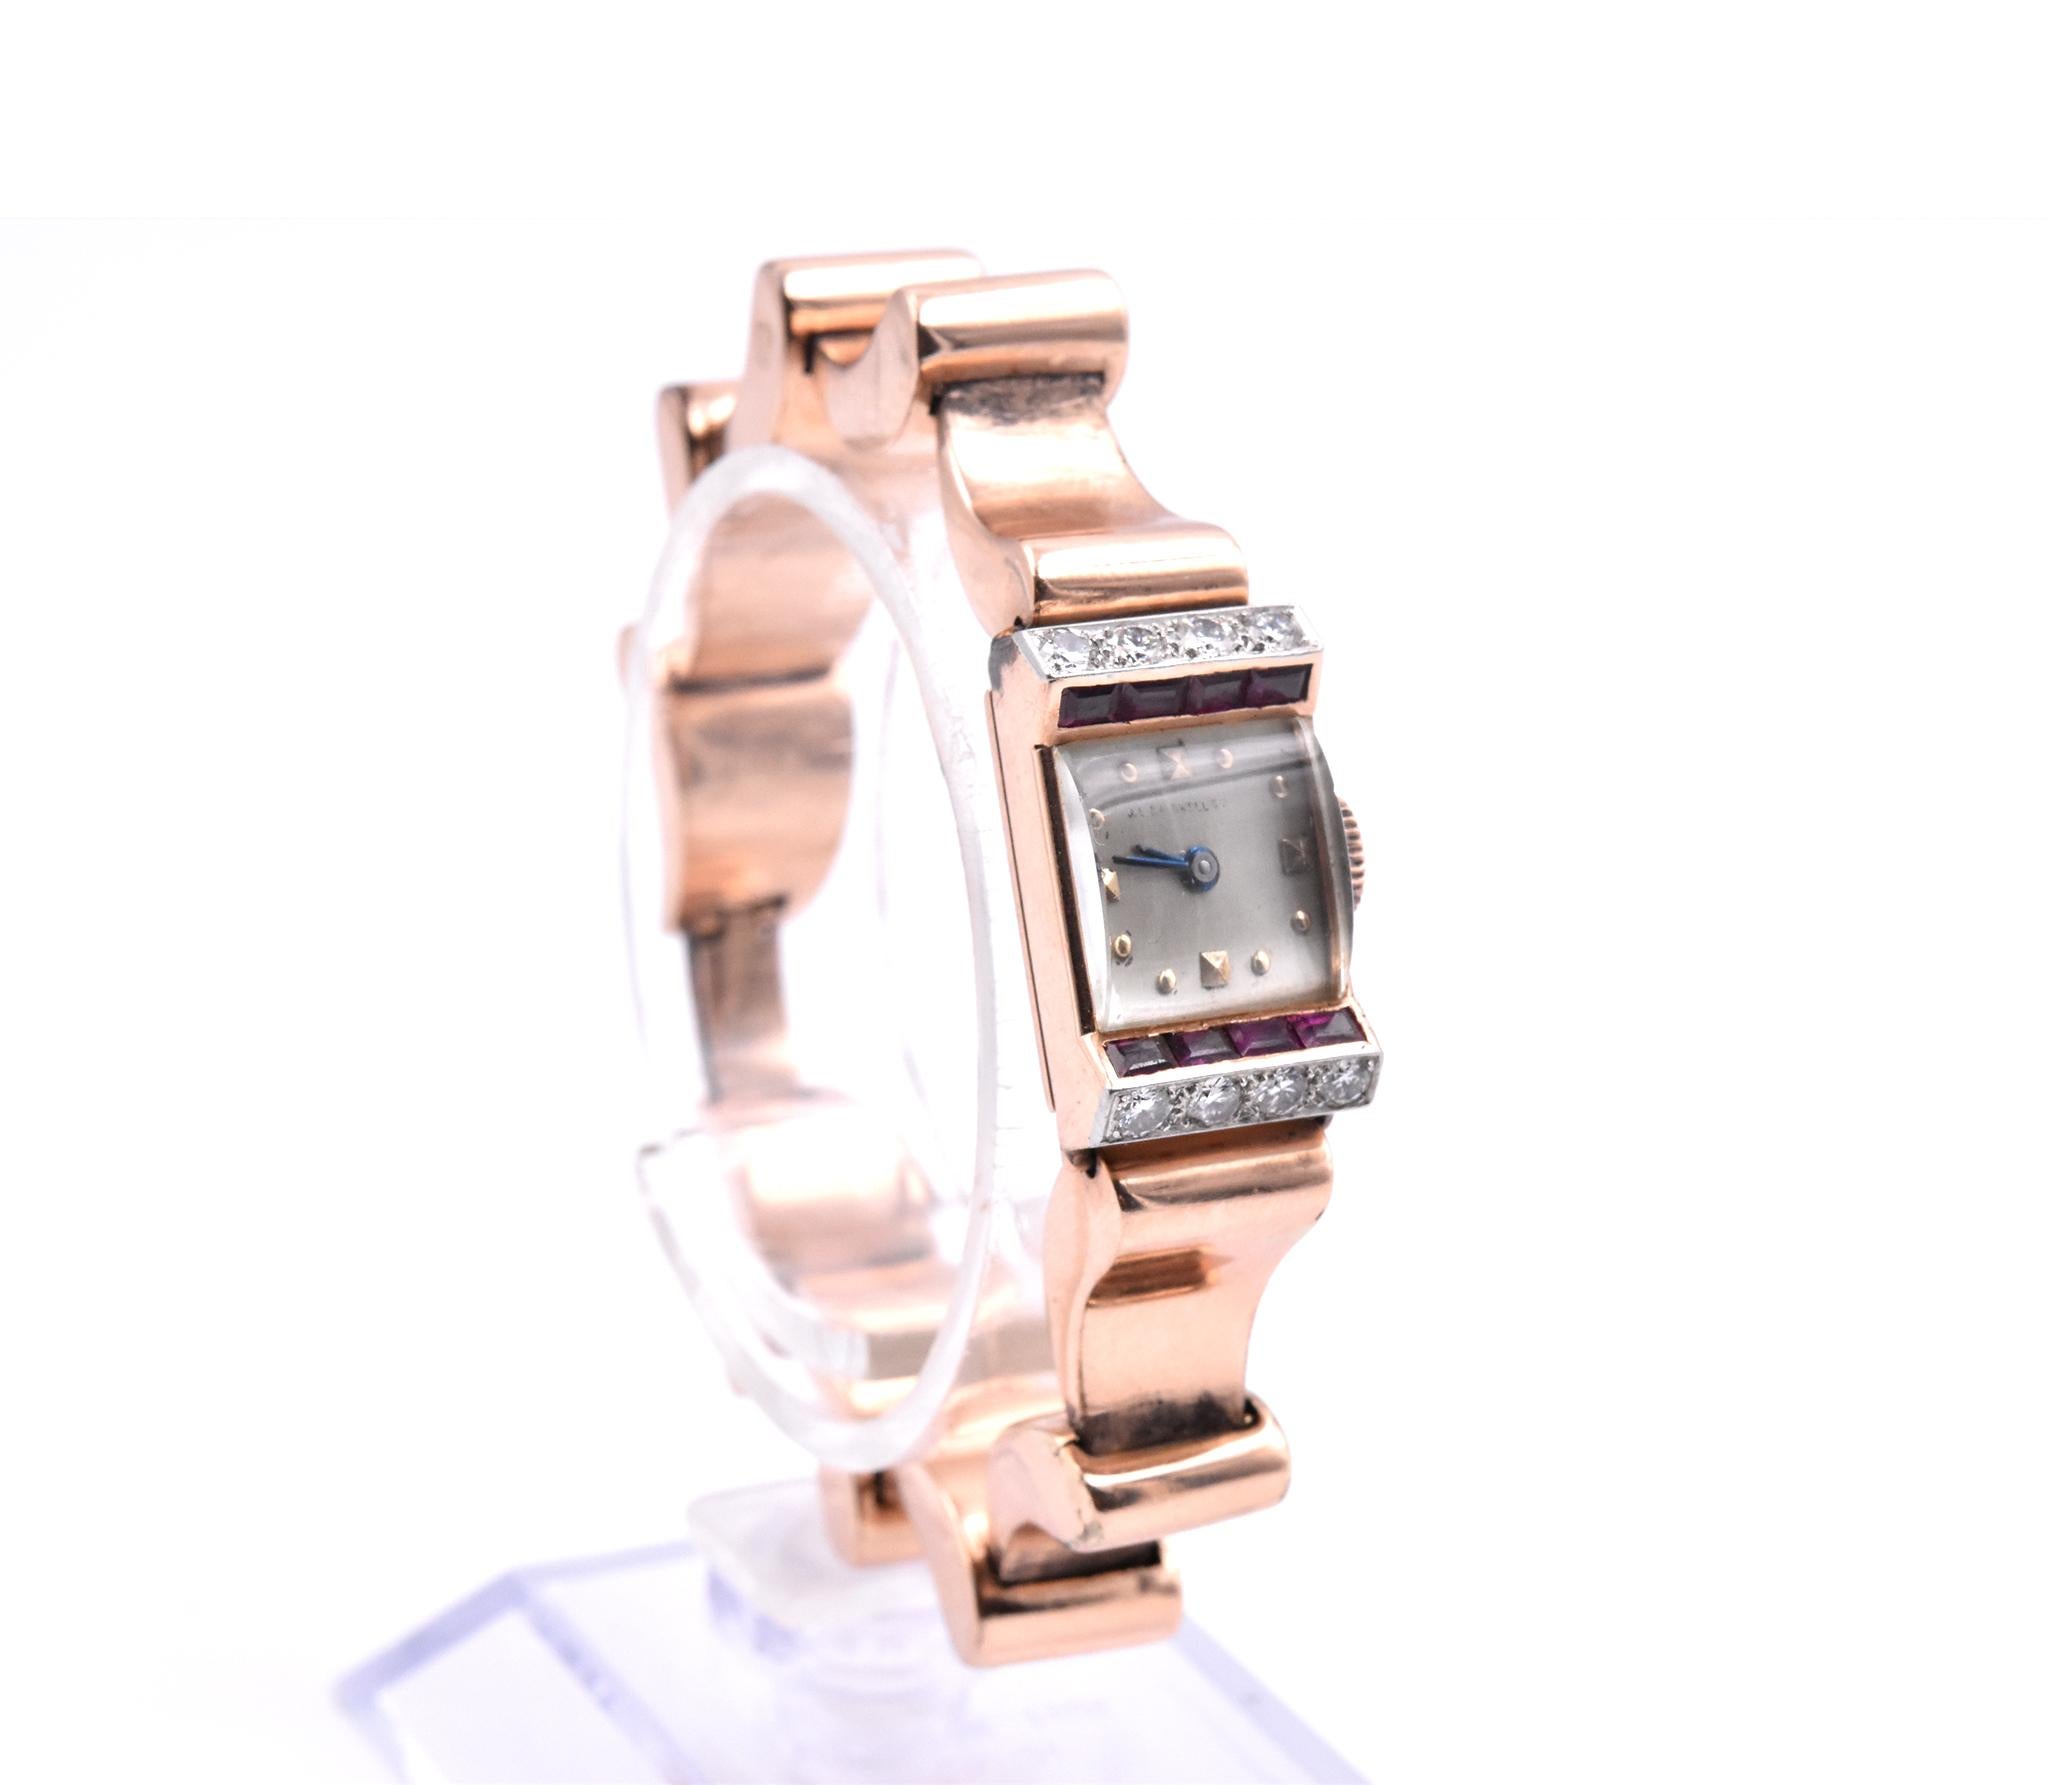 Movement: 17 jewel swiss manual wind movement
Function: hours, minutes
Case: 12.60mm x 20.90mm rectangular case set with rubies and diamonds, push/pull crown
Band: 14k rose gold wavy link bracelet
Dial: beige dial with gold square hour markers
Case